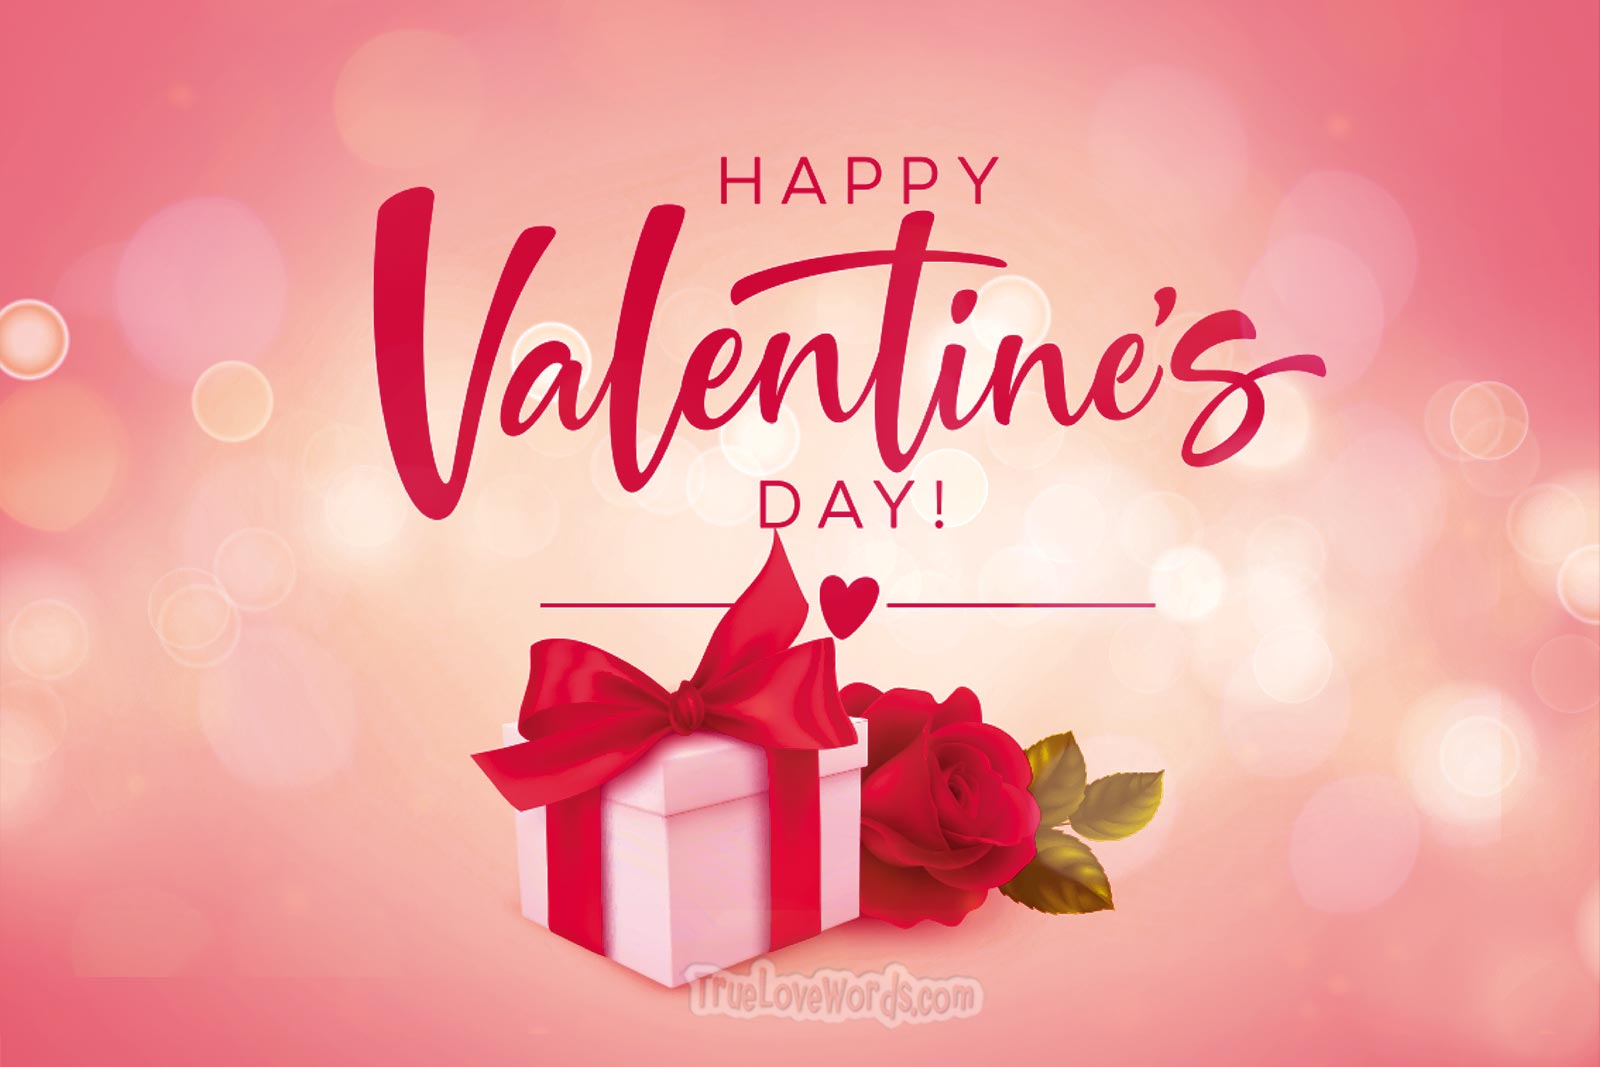 Best 2022 Valentine's Day Messages And Wishes For Loved Ones